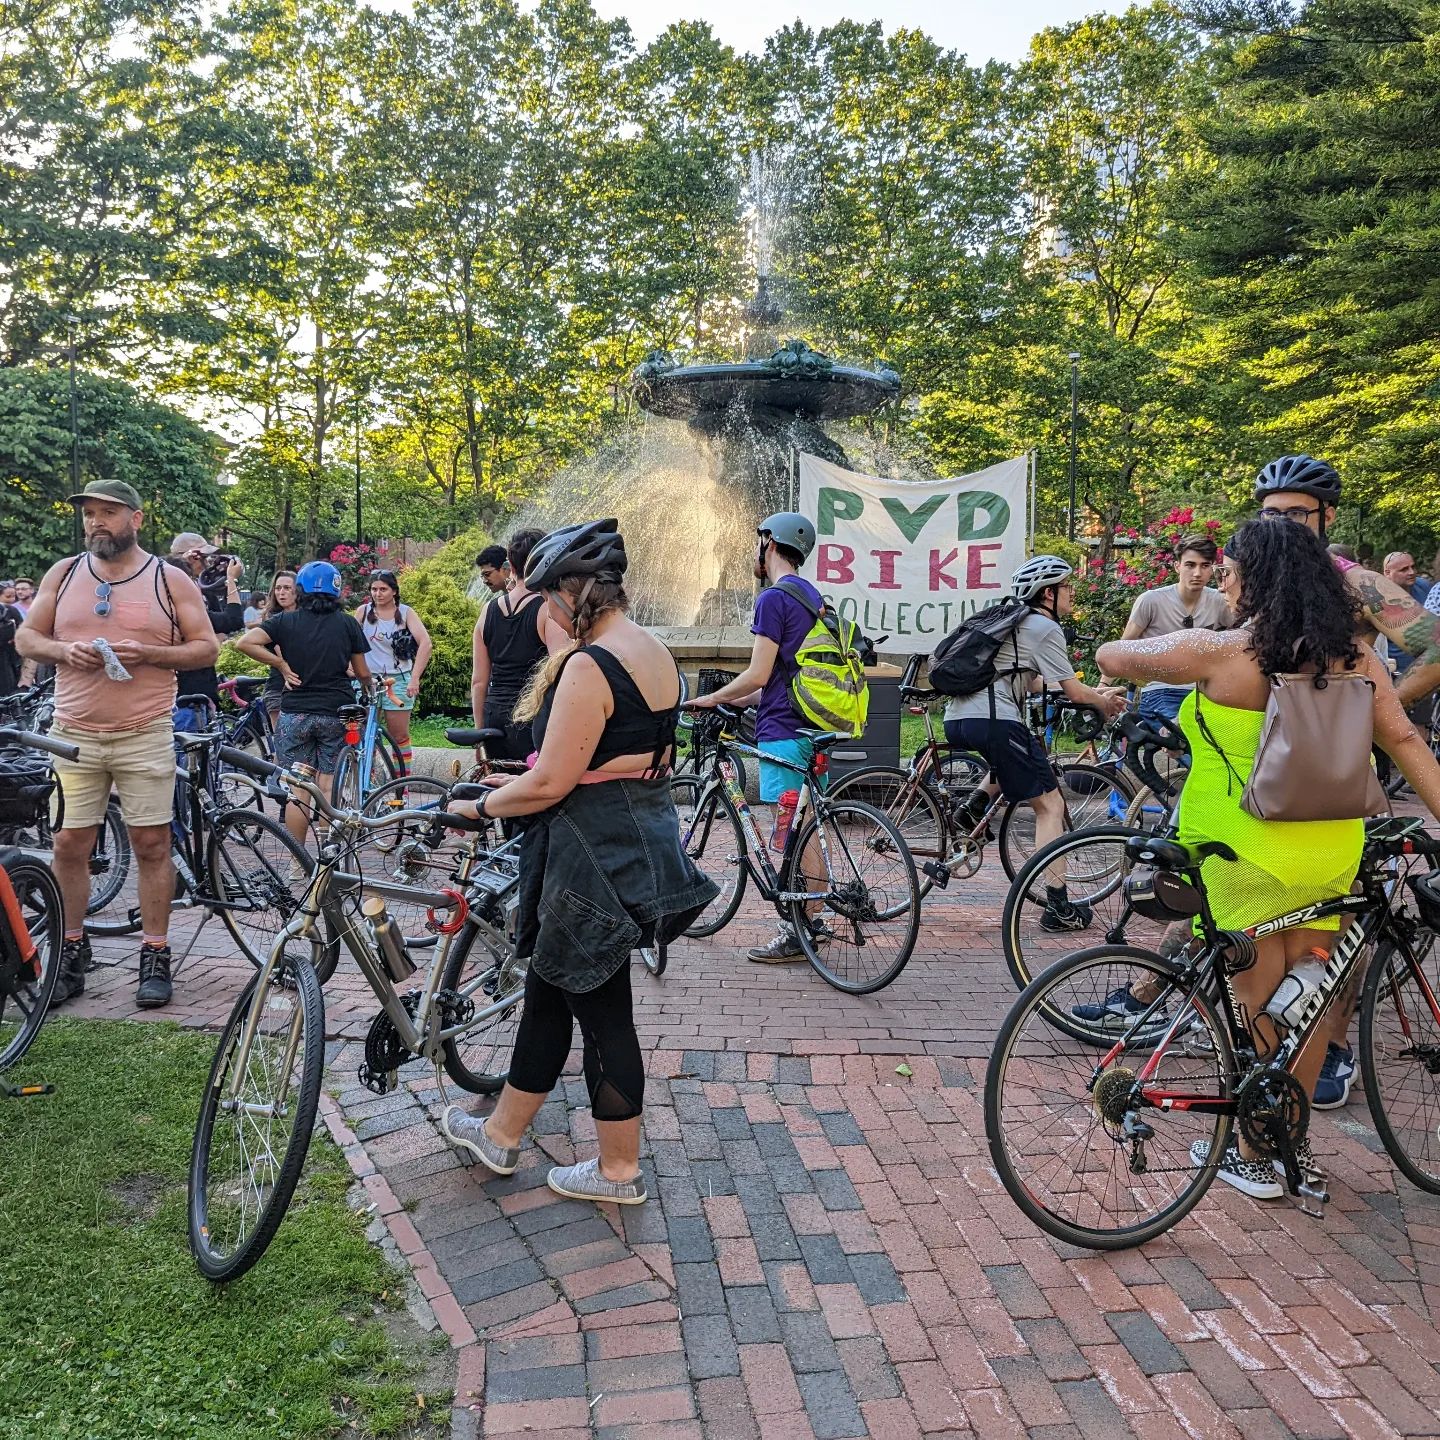 Riders getting ready for a ride with the PVD Bike Collective in a park. Photo by Instagram user @echasc